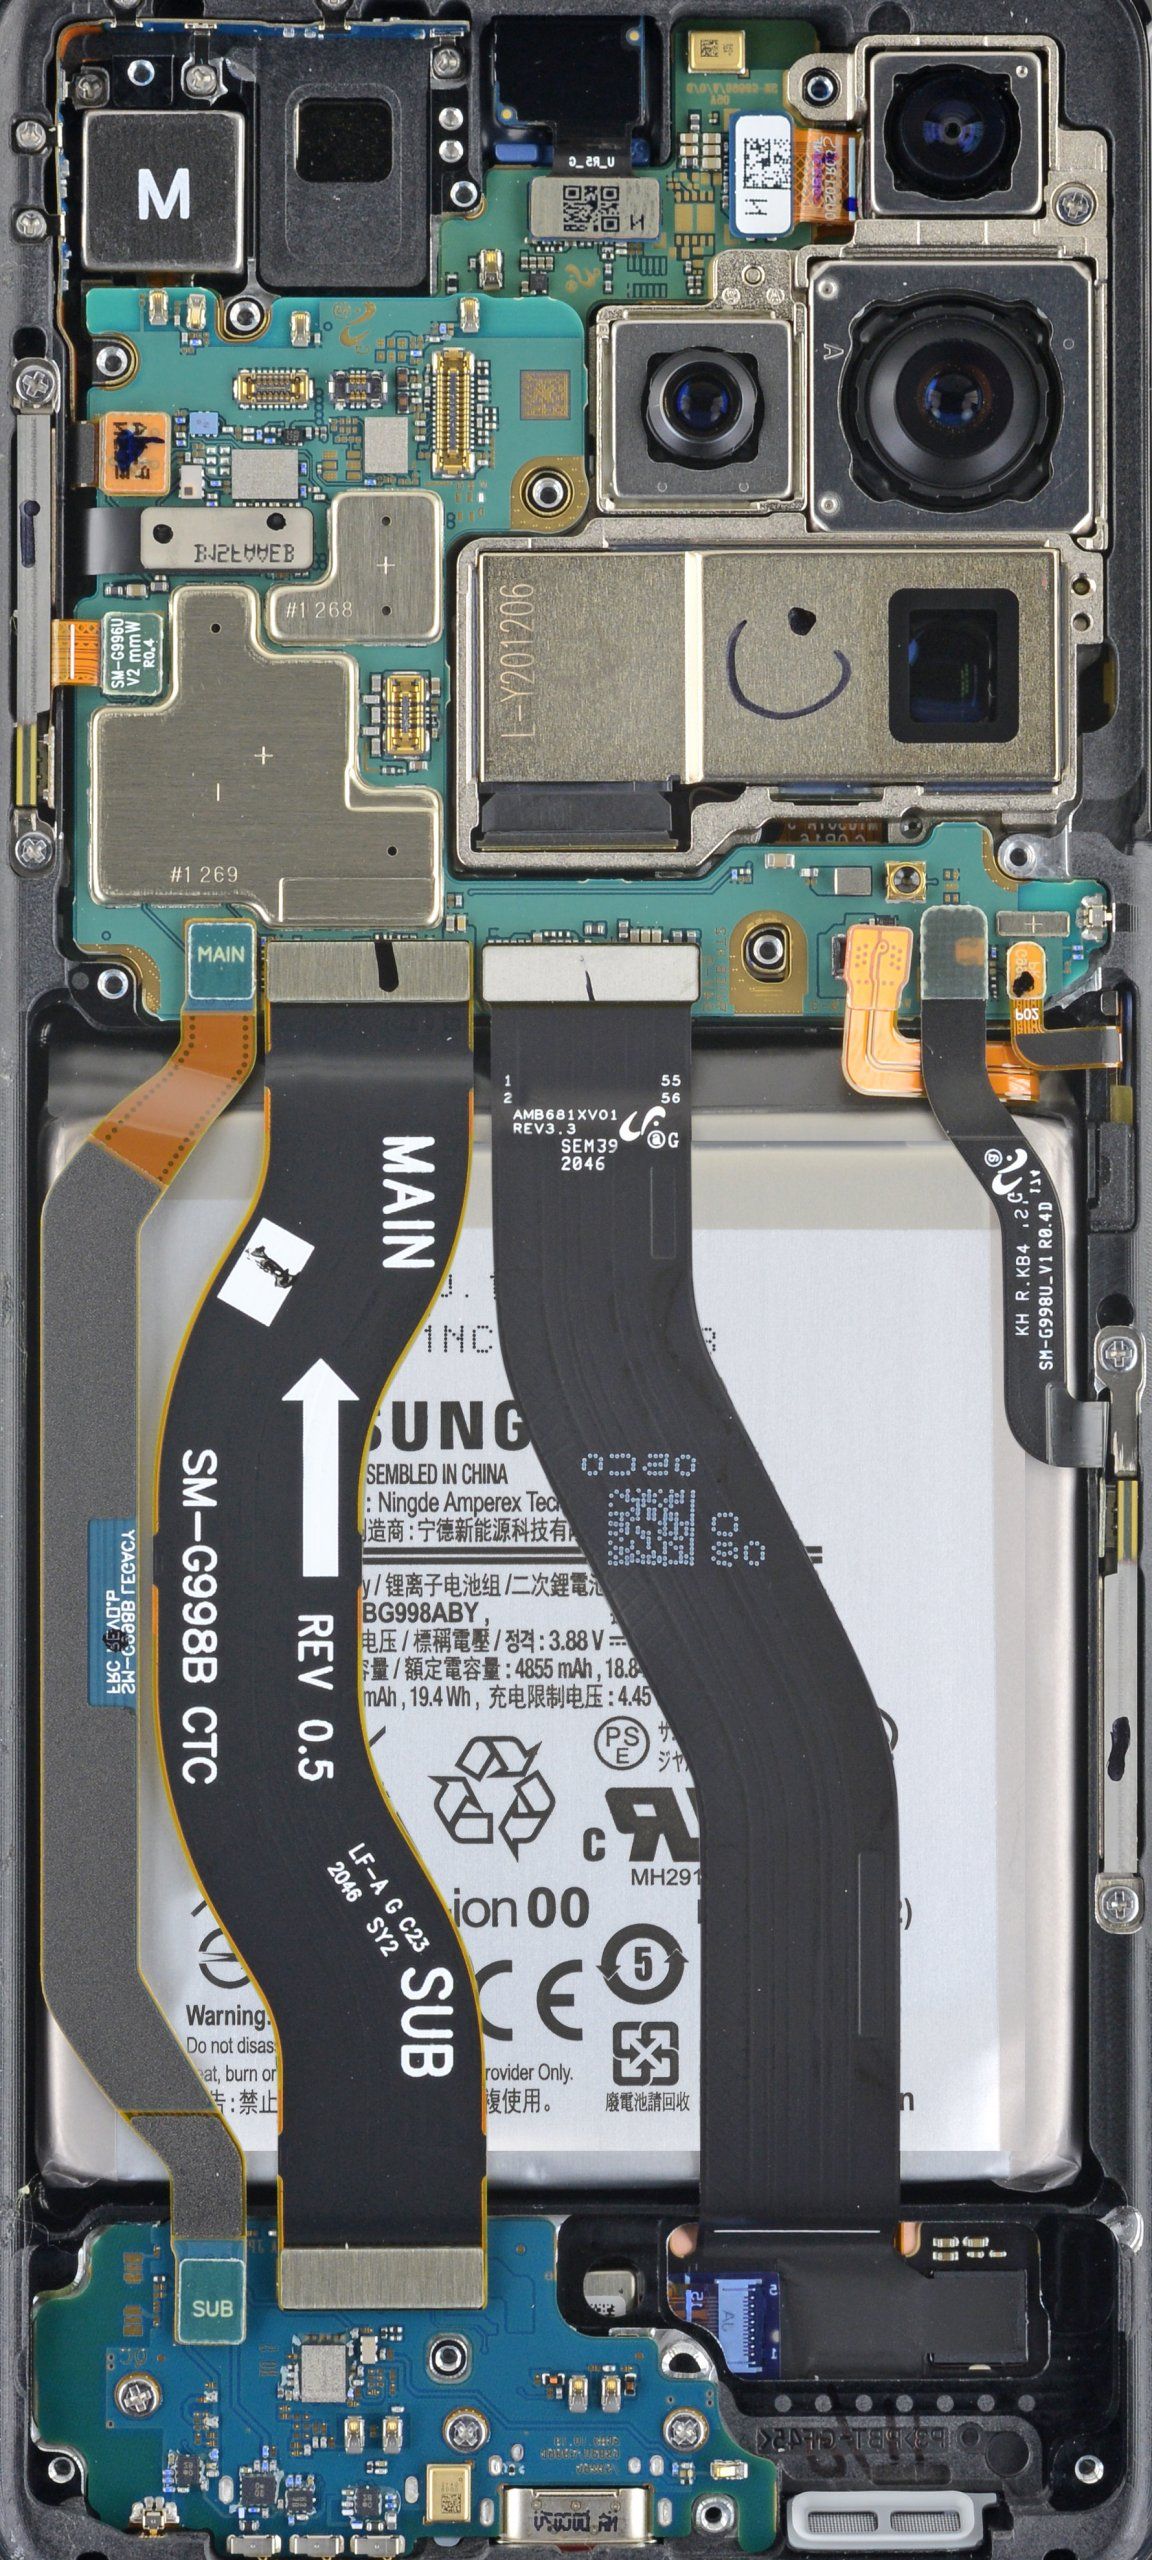 Samsung Galaxy S21 Ultra Teardown & X Ray Wallpaper, For The Phone That Has It All